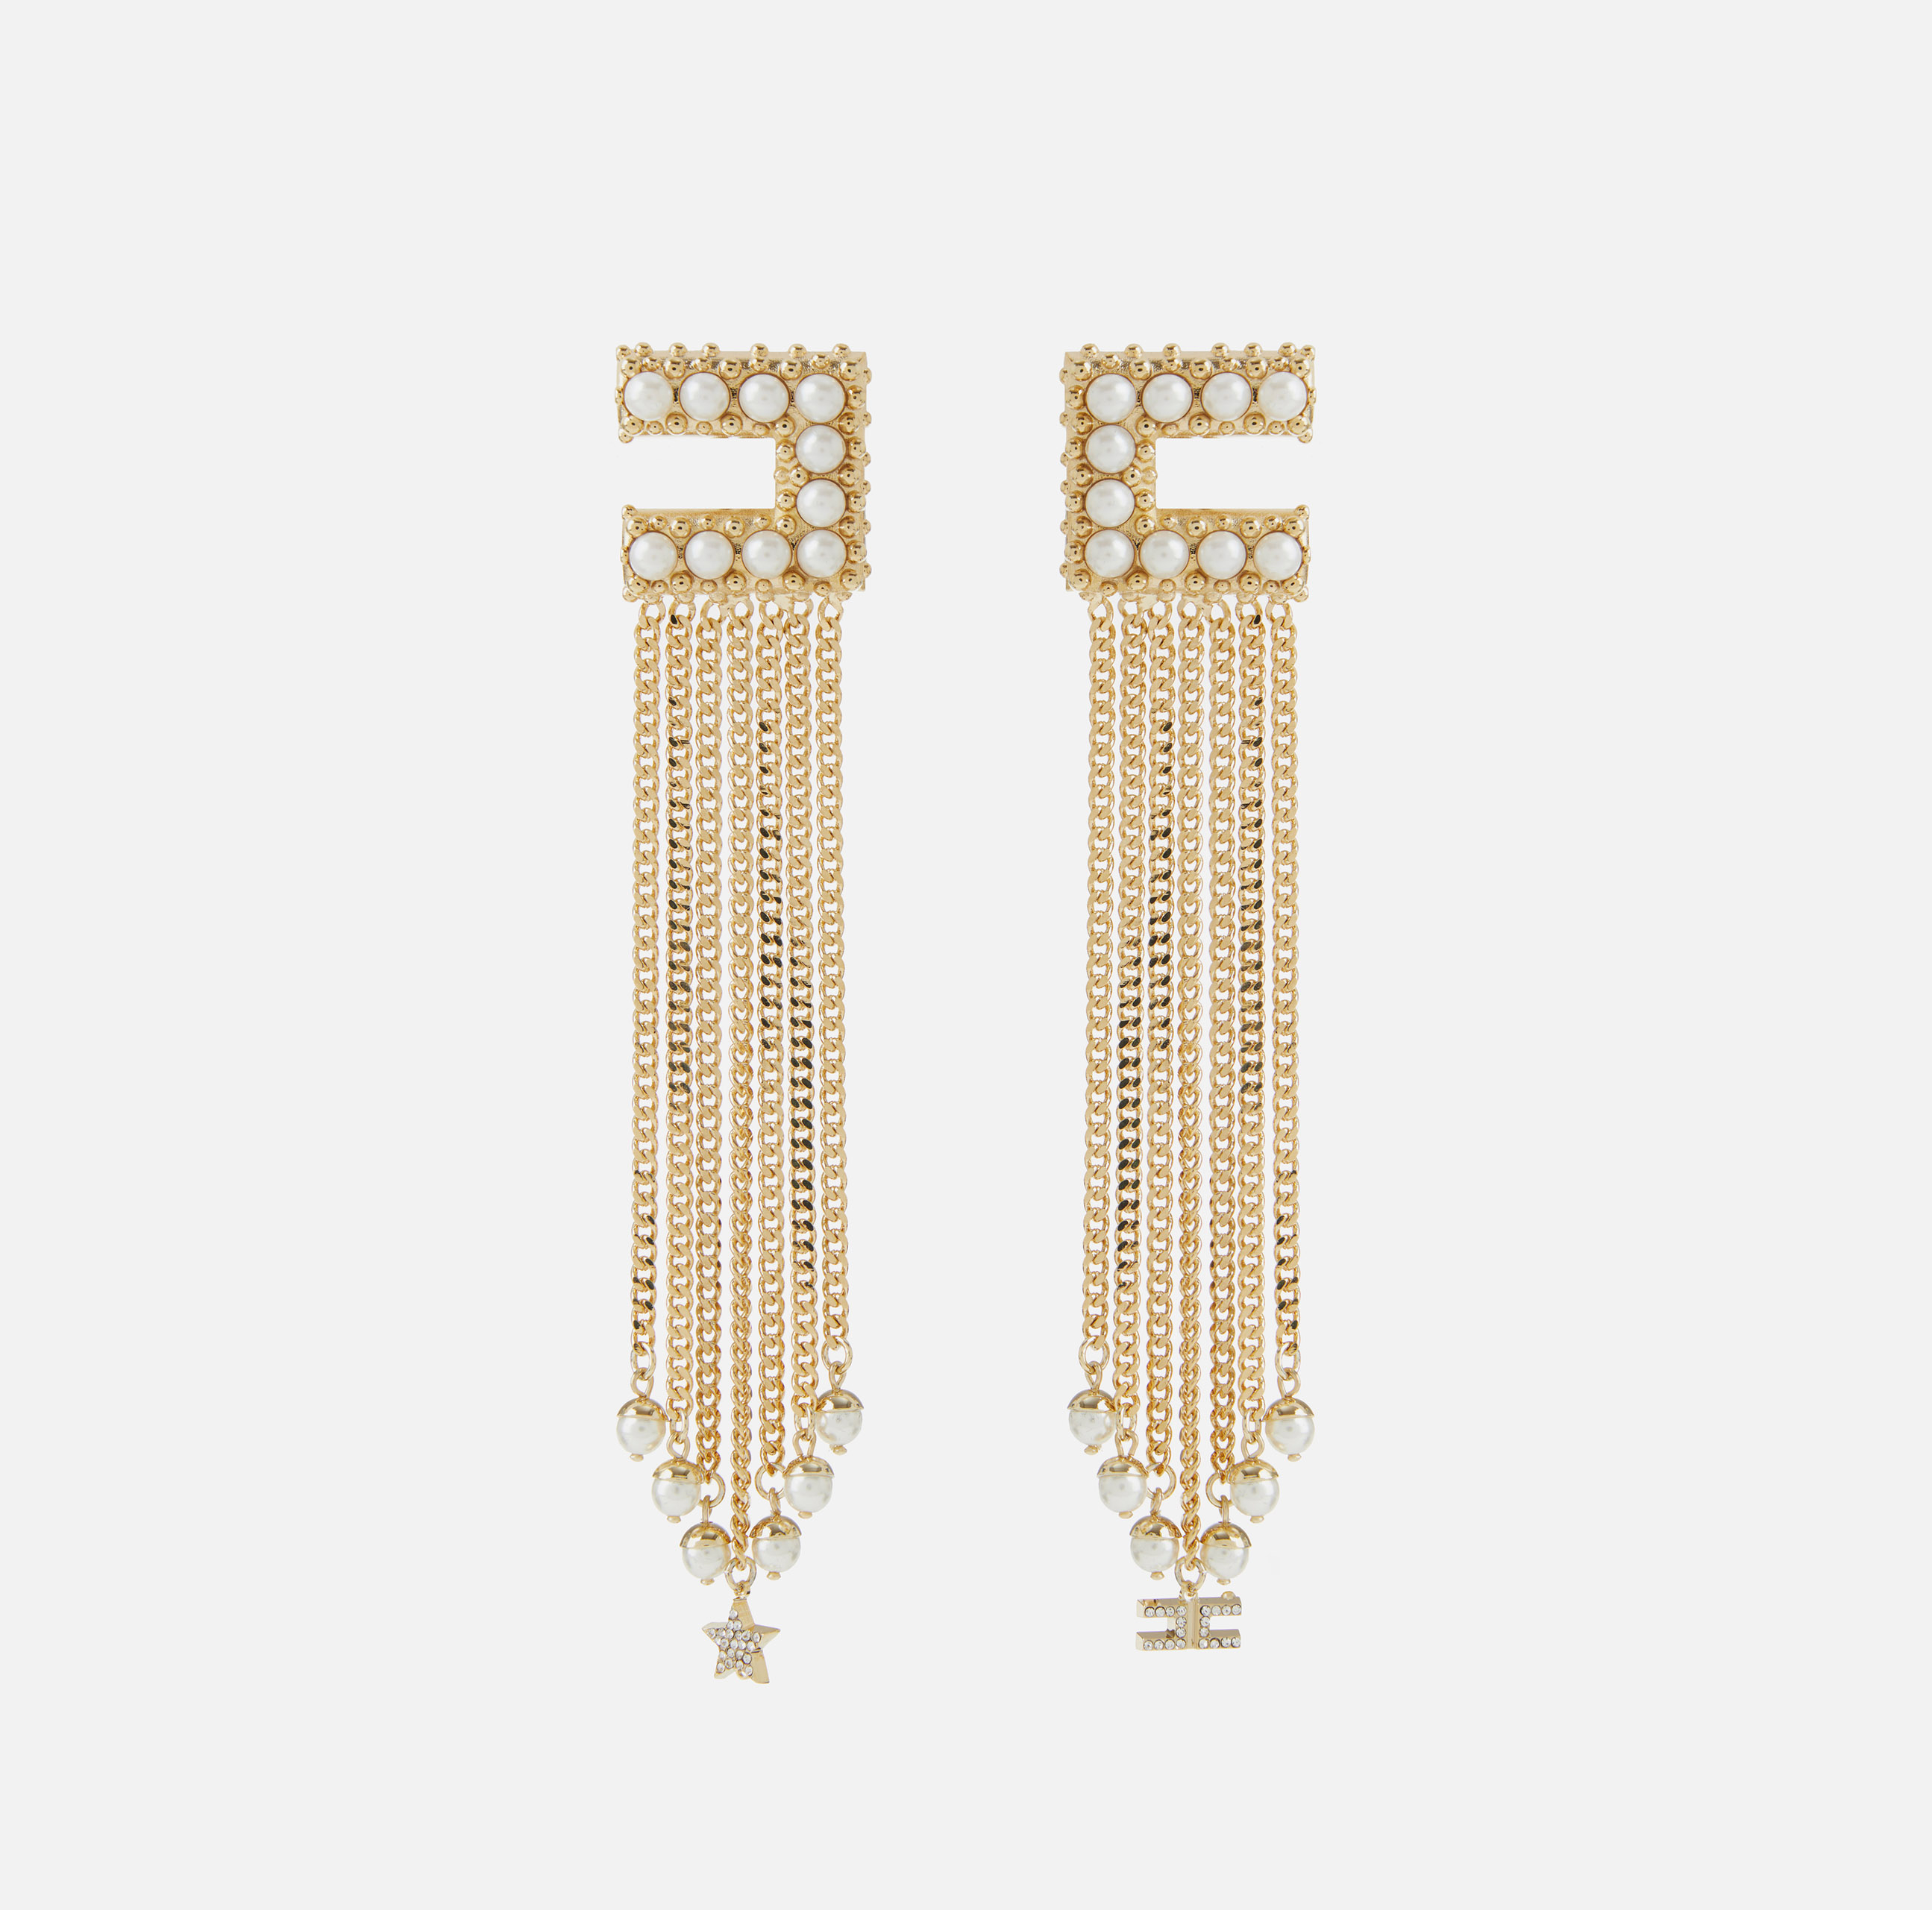 Earrings with maxi logo and pearls - ACCESSORI - Elisabetta Franchi